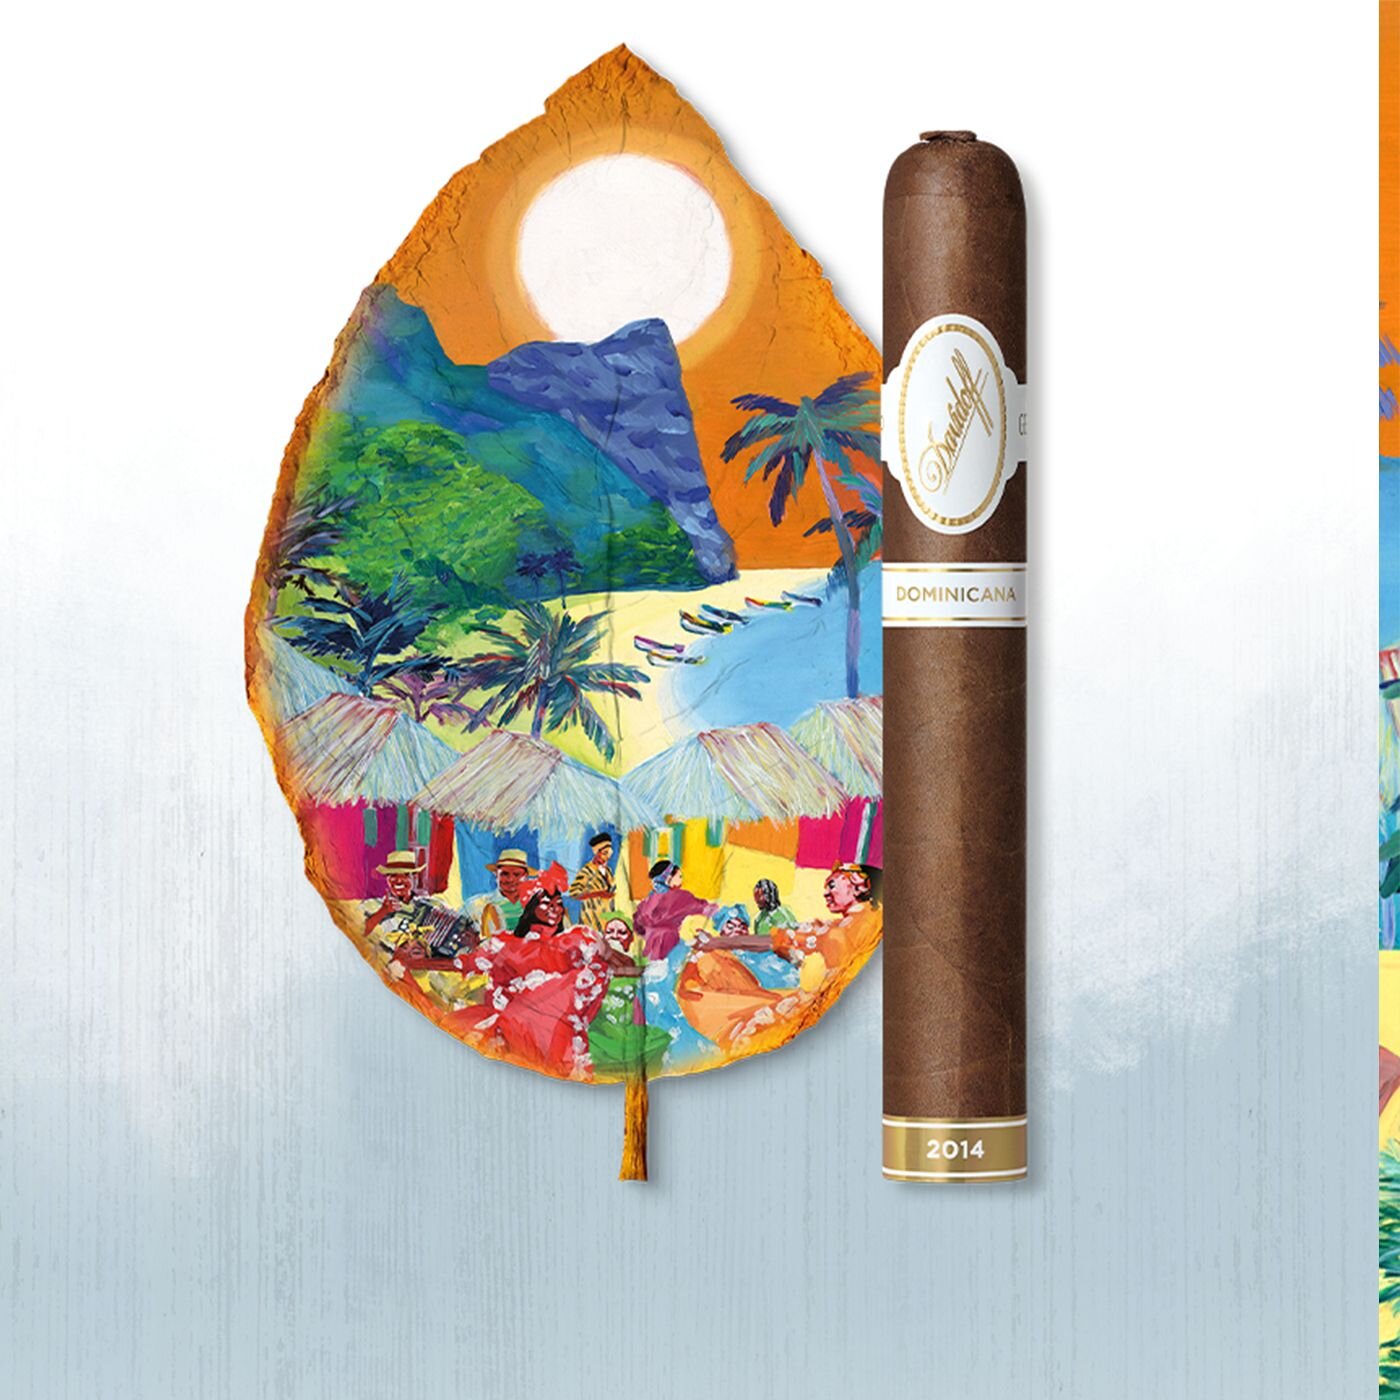 Colorful artwork of the Dominican lifestyle as illustration on a tree leaf - dancing women with musicians in the background palm trees and houses as artificial illustration next to the artwork is a cigar. 